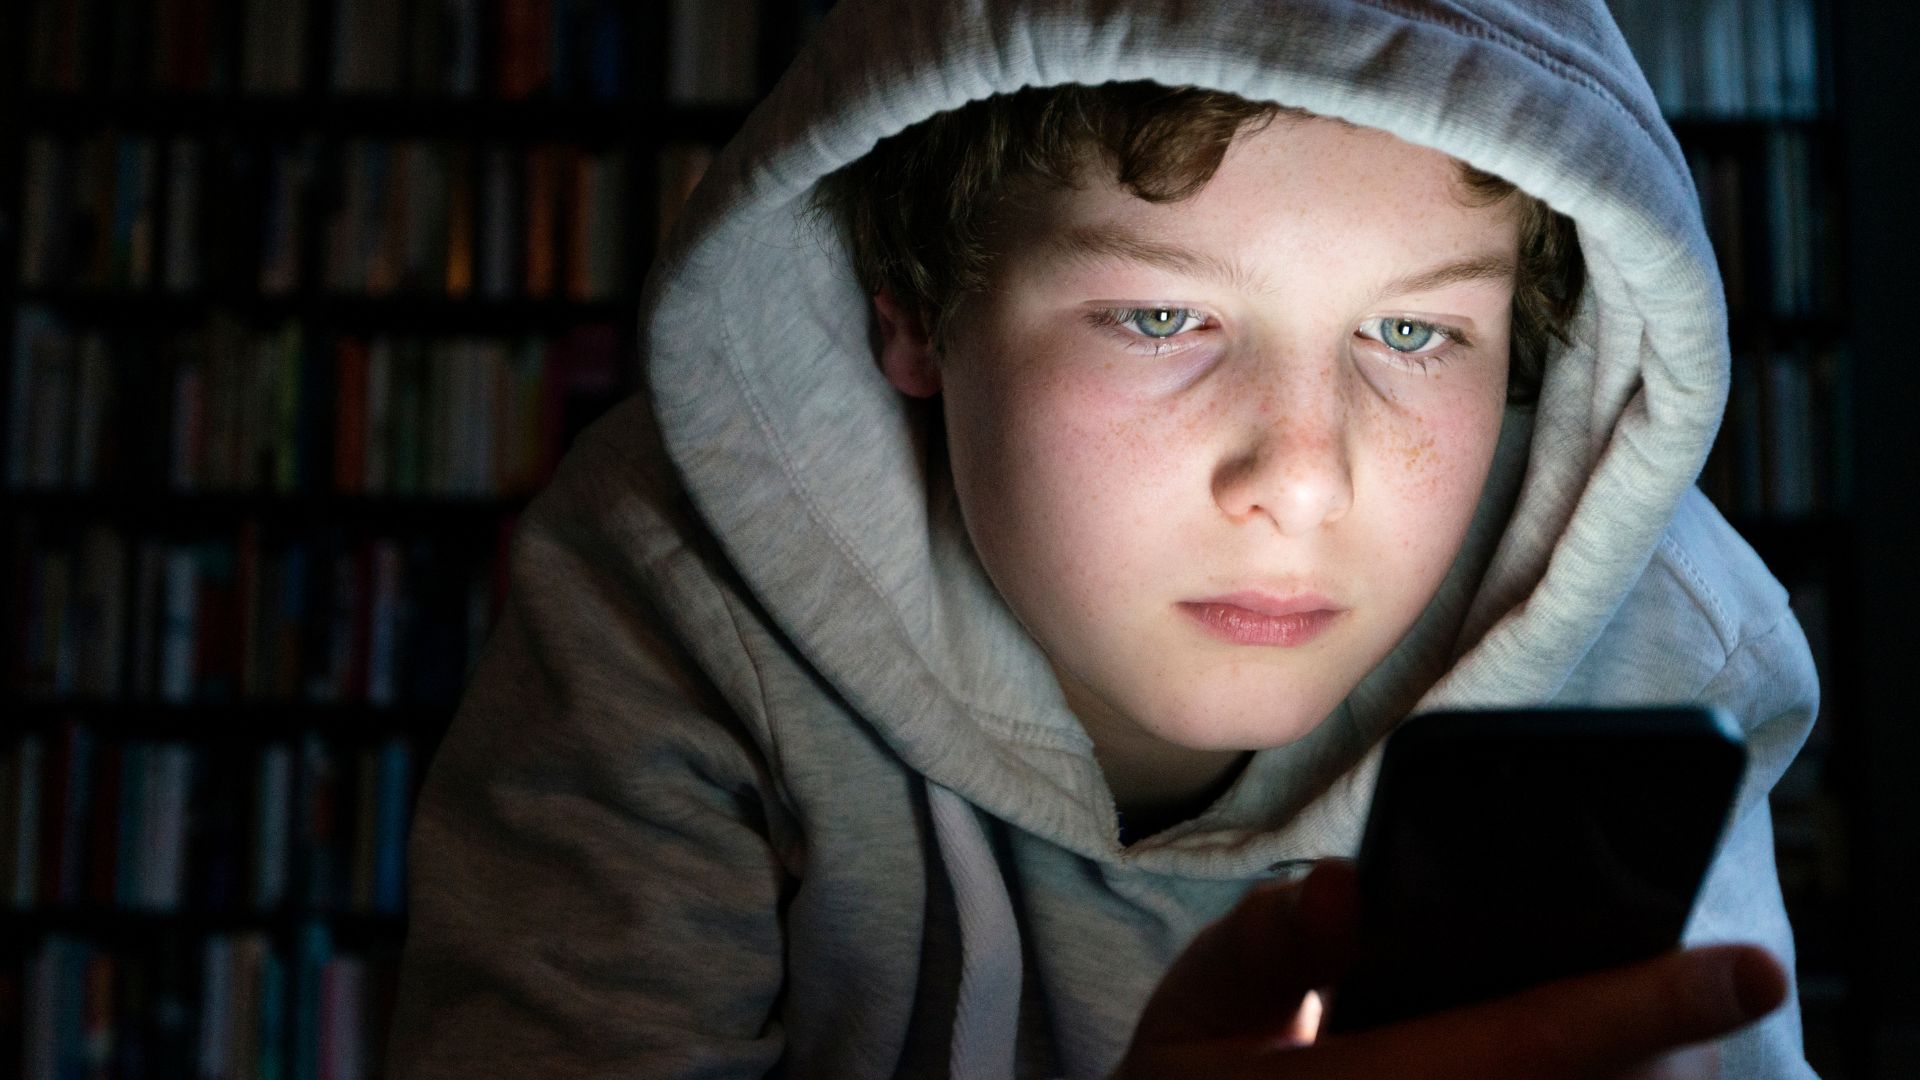 The Many Dangers of Technology for Kids